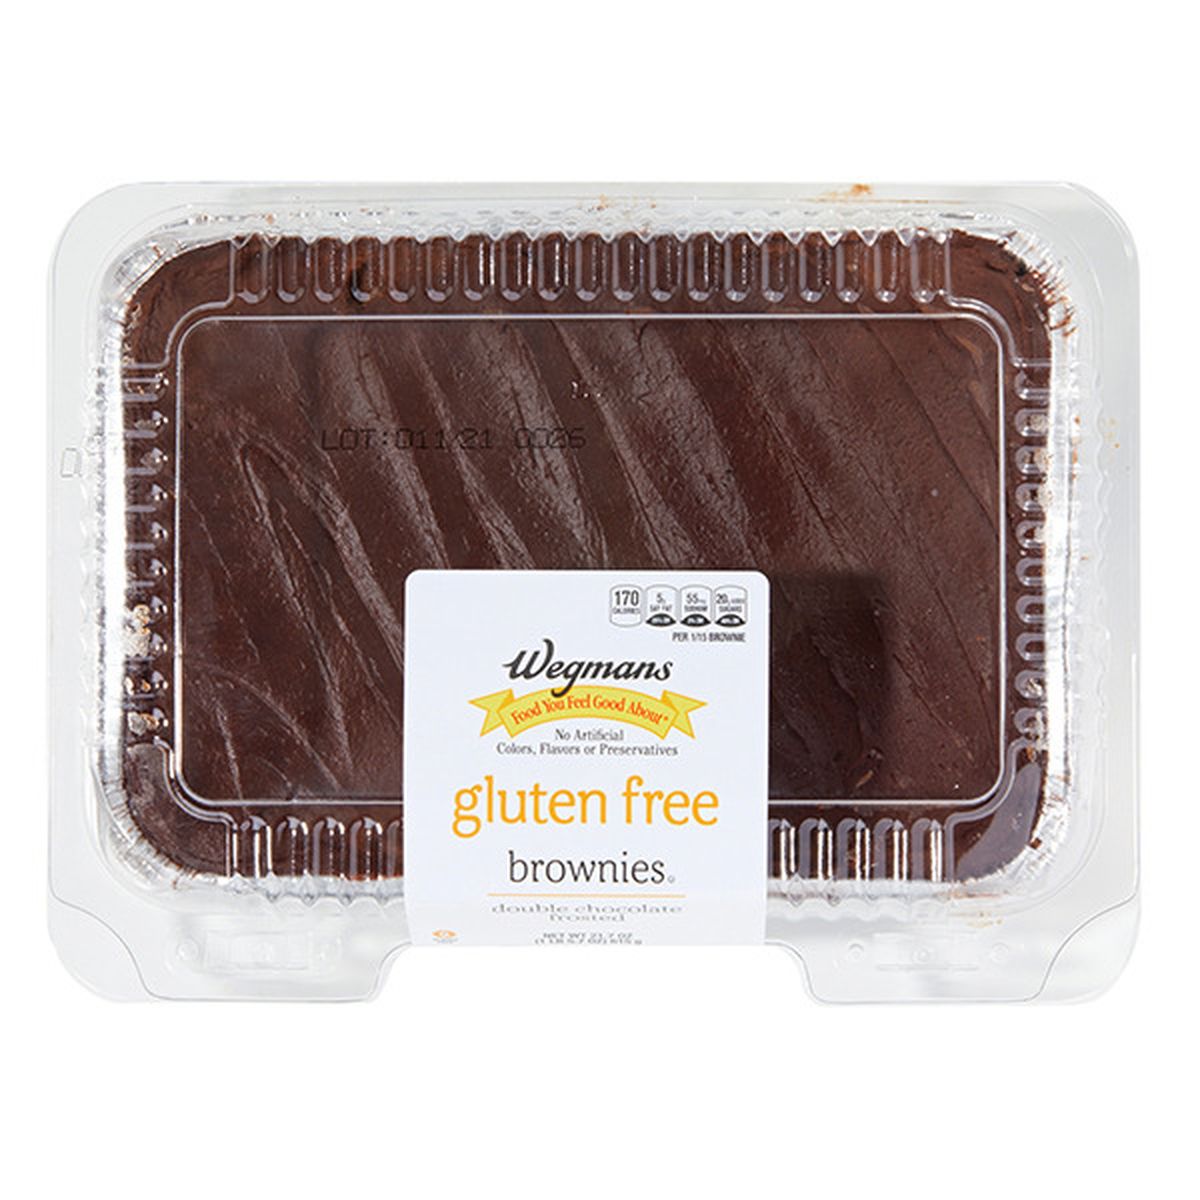 Calories in Wegmans Gluten Free Double Chocolate Frosted Brownies